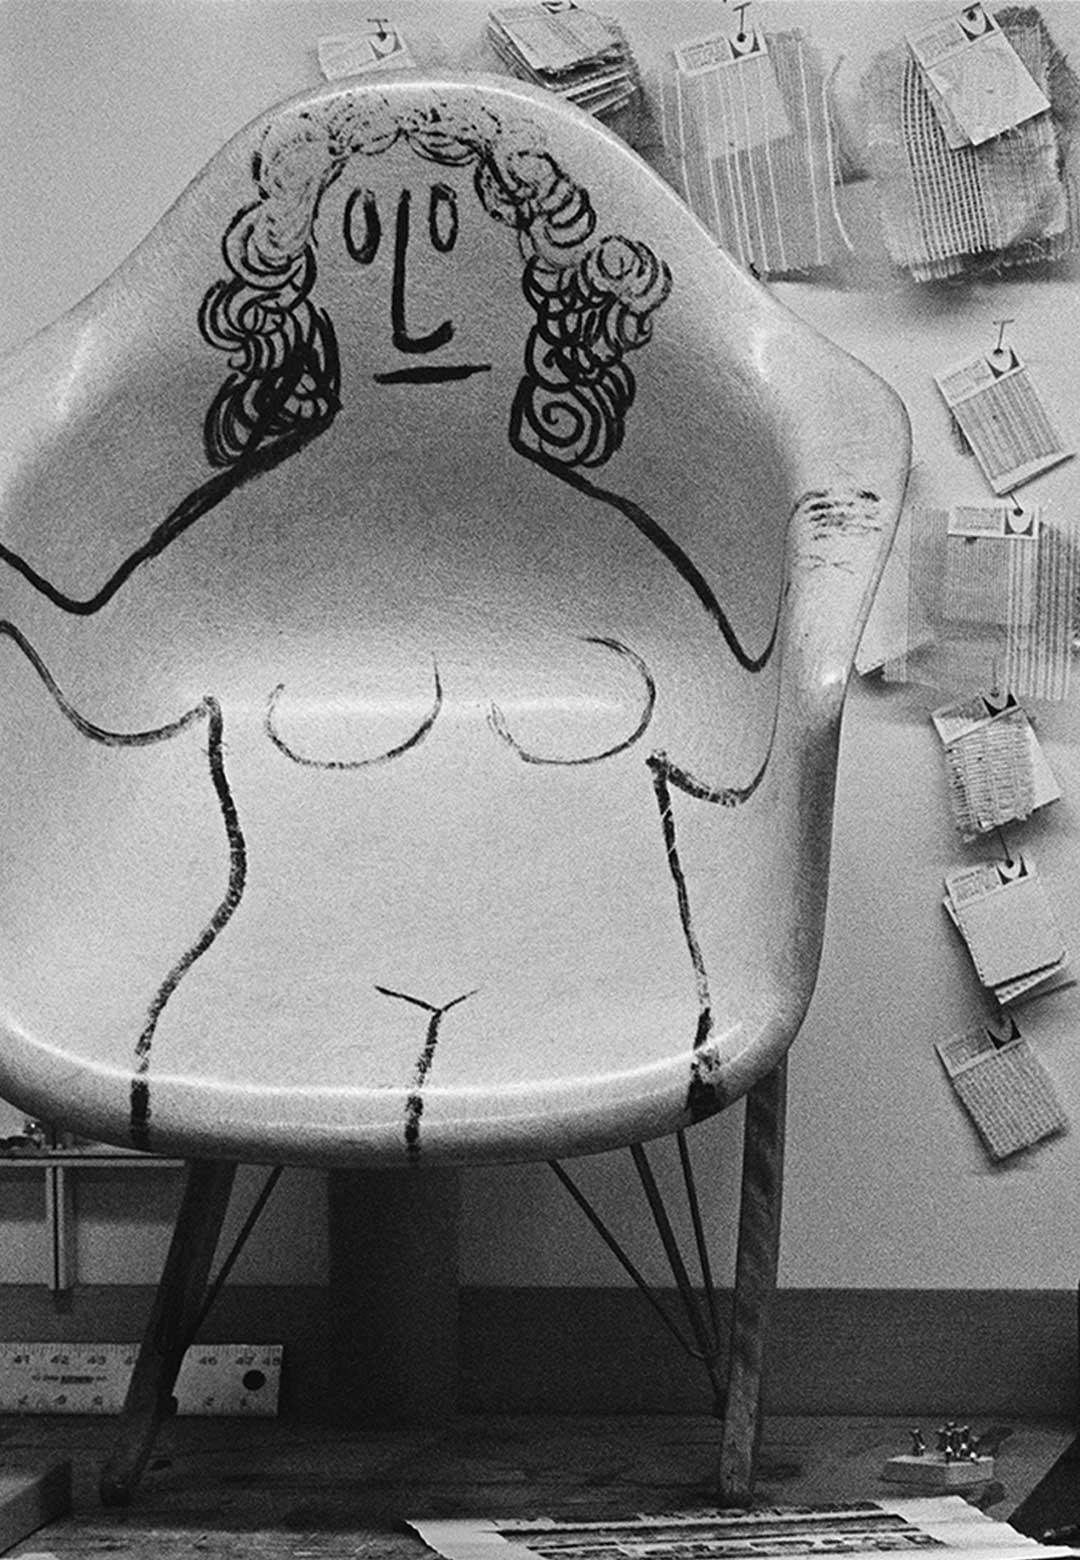 Eames Institute's online exhibition narrates the duo’s collaboration with Saul Steinberg